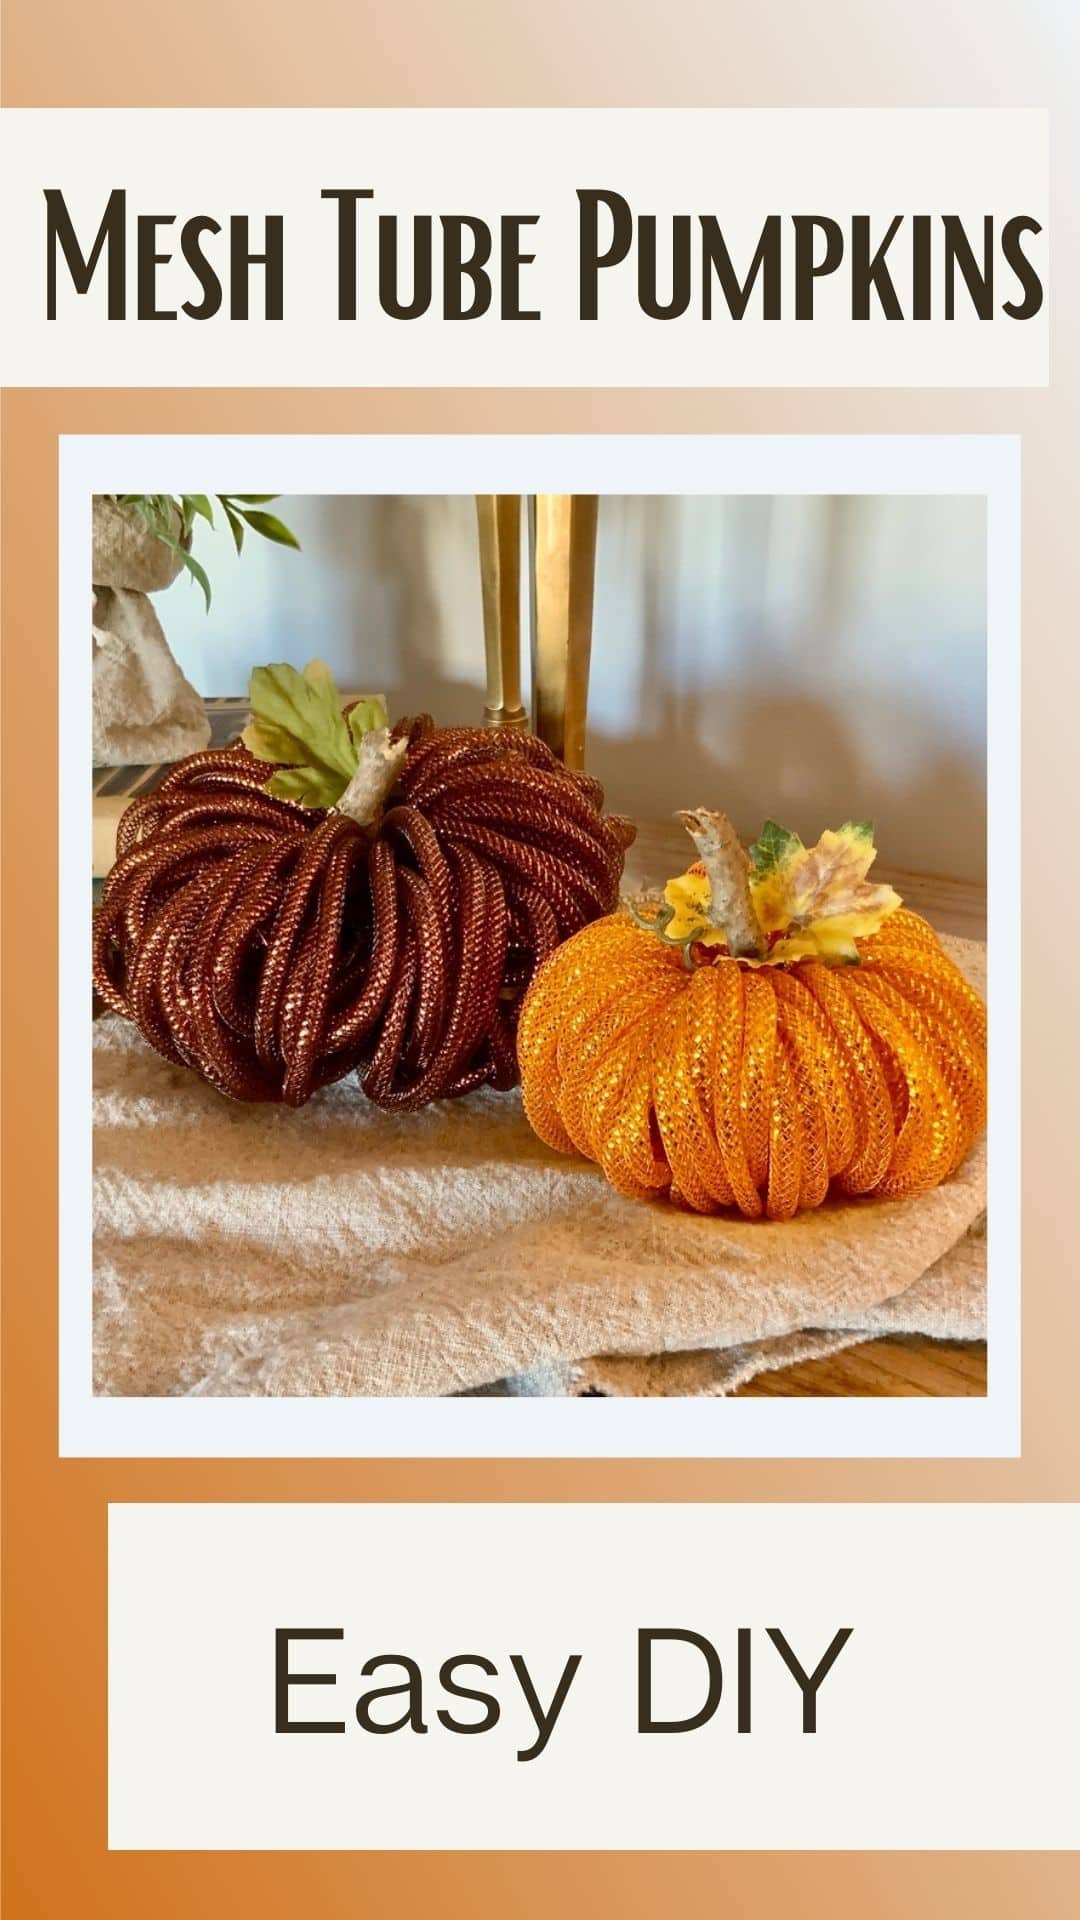 Pin with the image of two mesh tube pumpkins on a washed linen table runner with a Title above "Mesh Tube Pumpkins" and below "Easy DIY"